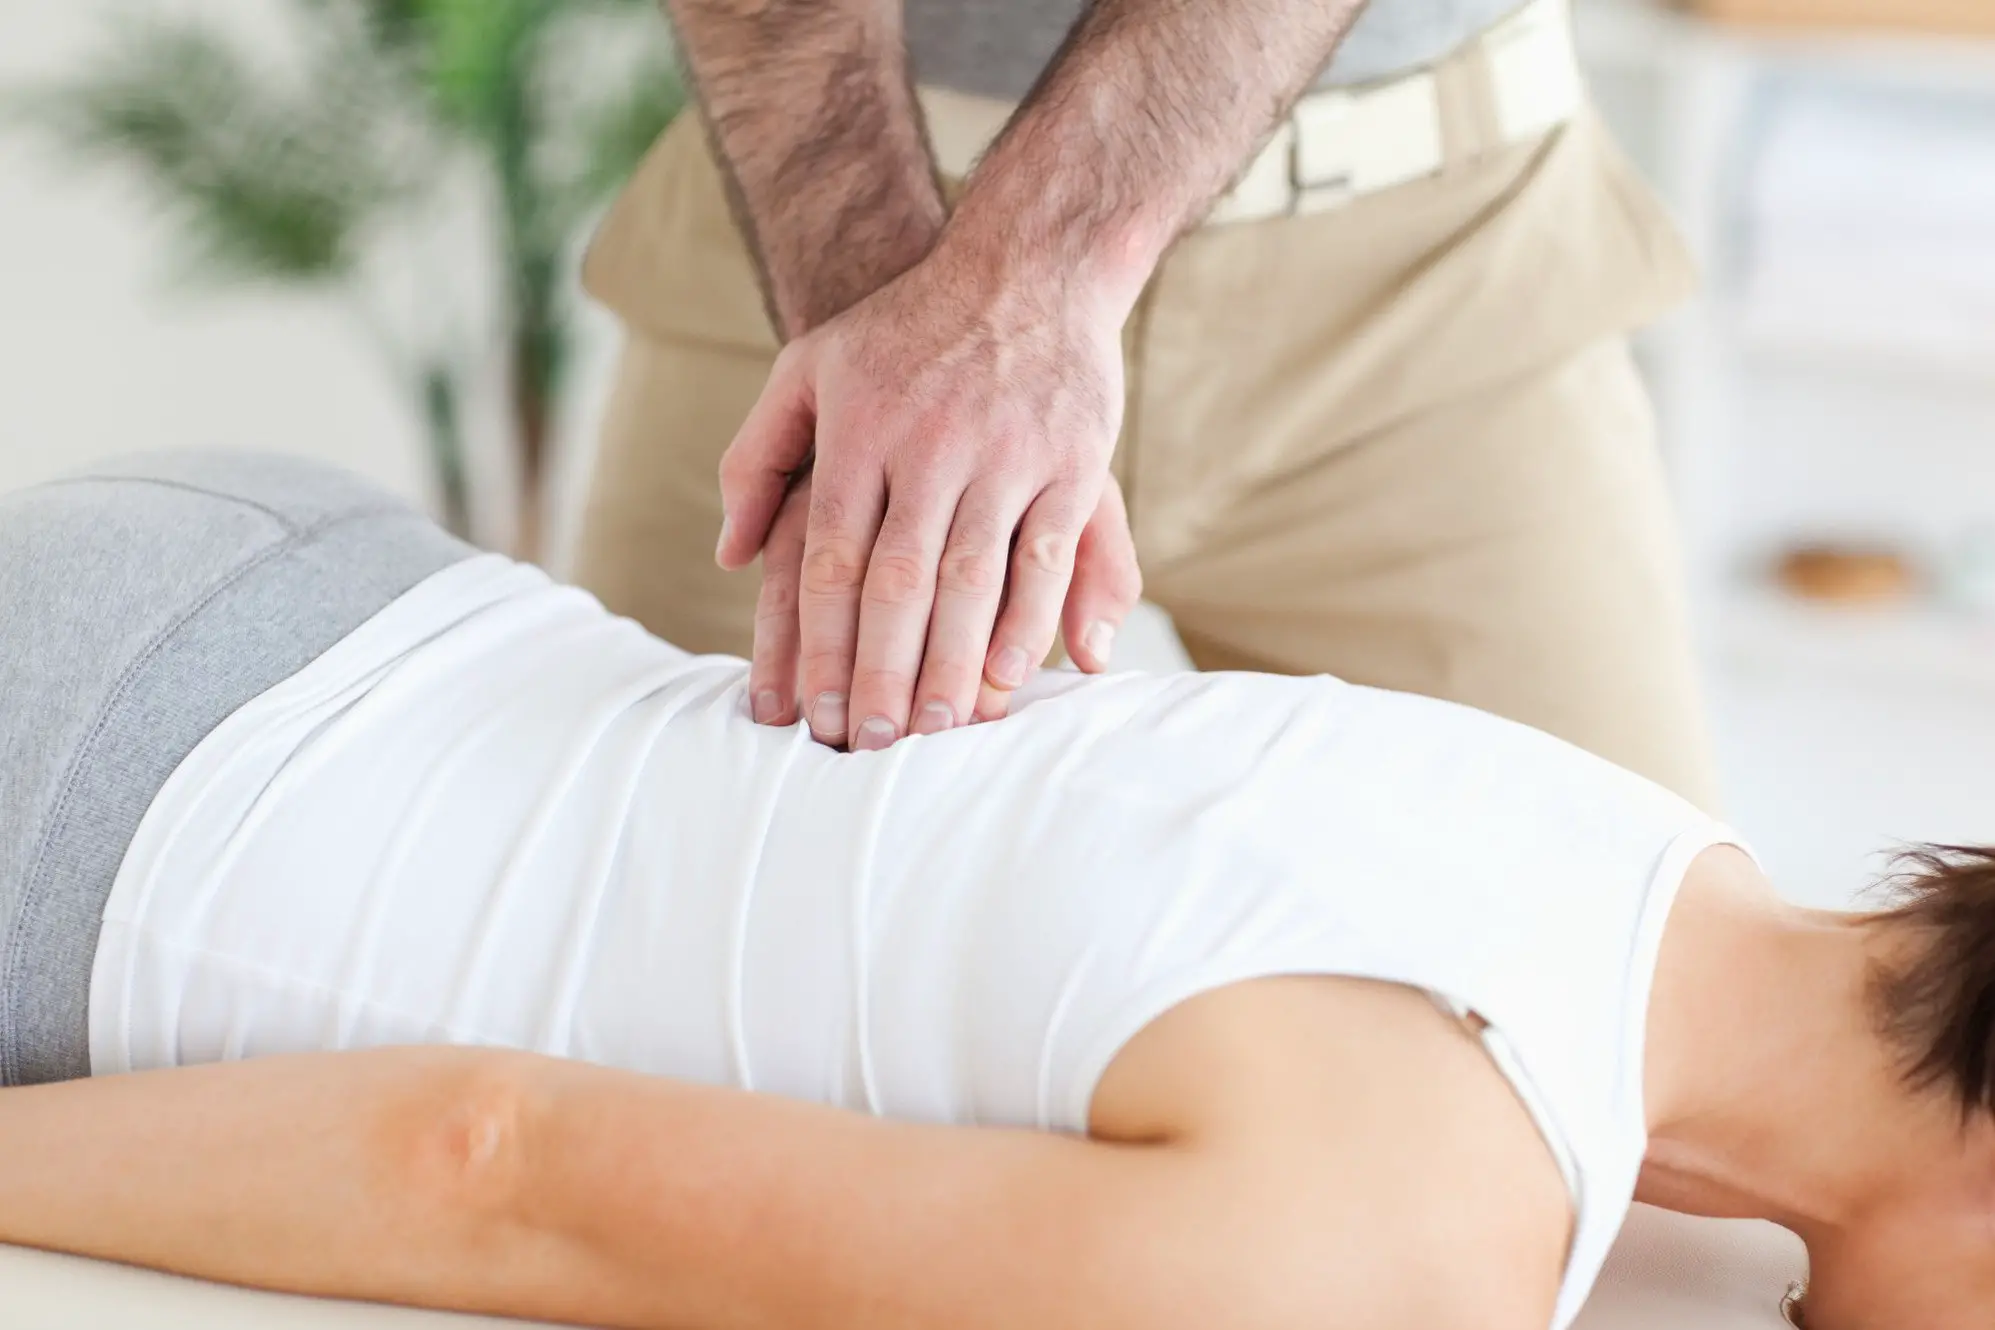 Back Pain Chiropractor Near Me! 6 Tips for Finding a Good One